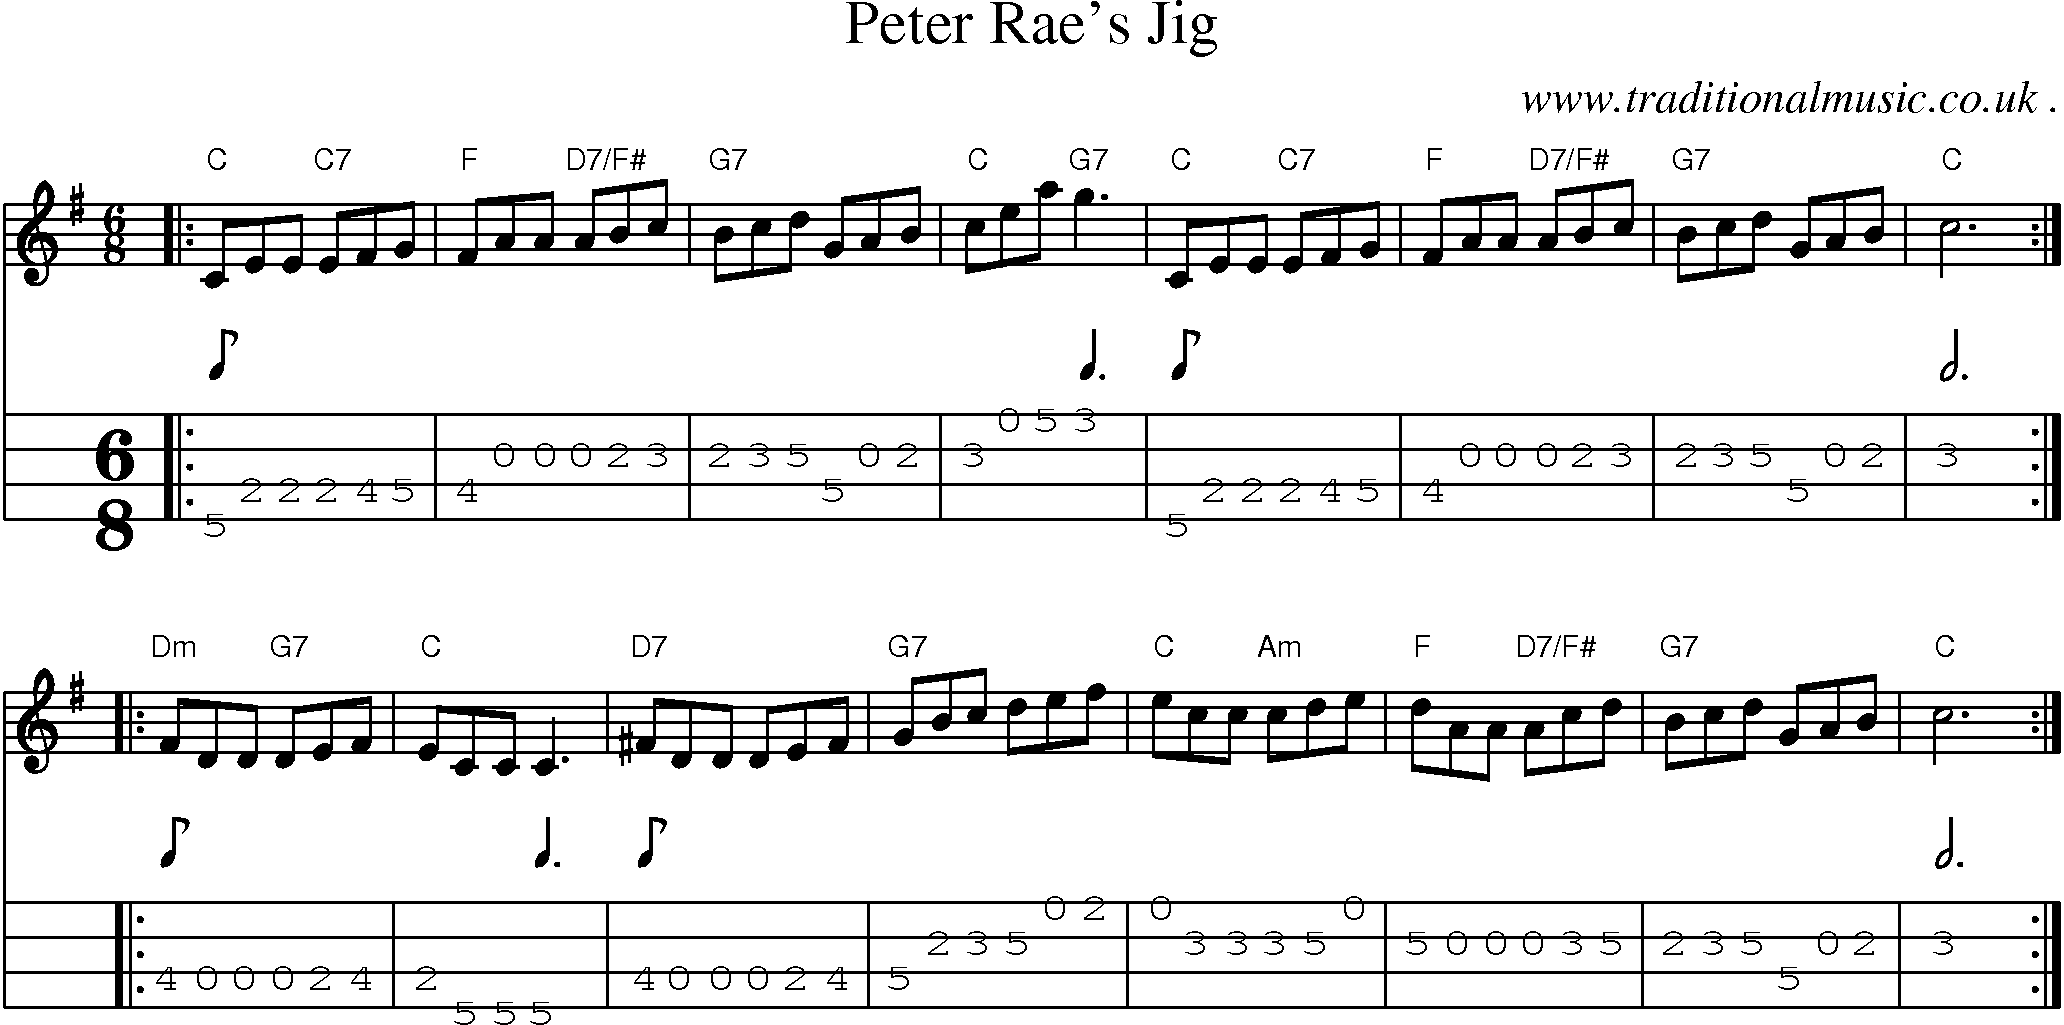 Sheet-music  score, Chords and Mandolin Tabs for Peter Raes Jig